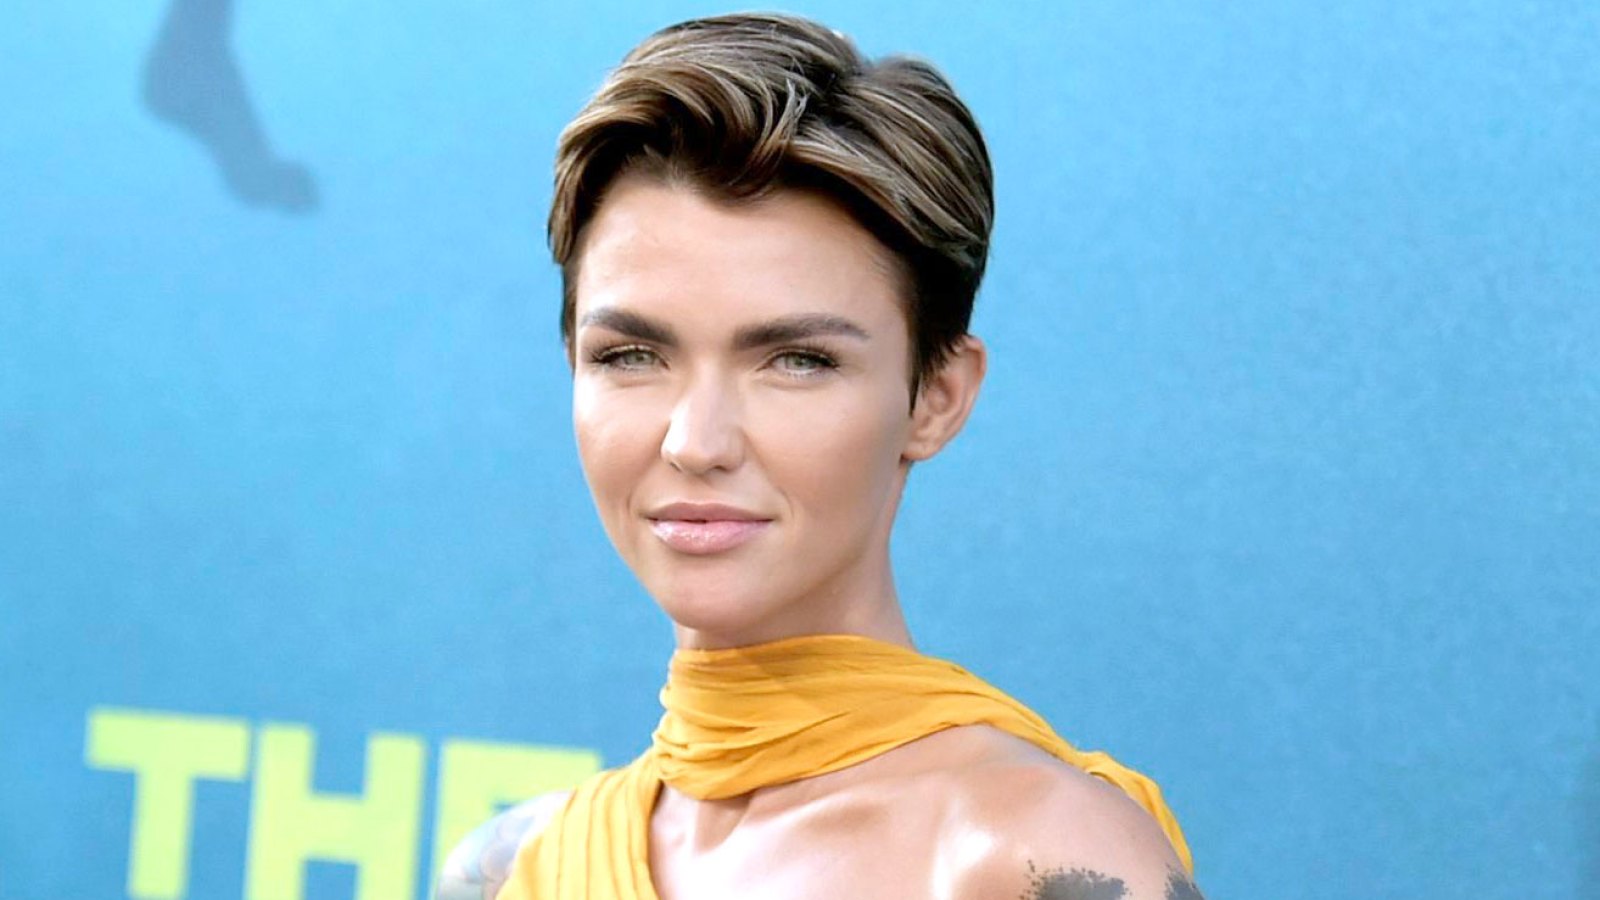 'Batwoman' Star Ruby Rose Reveals She Underwent Emergency Surgery After Stunt Injury Almost Left Her Paralyzed